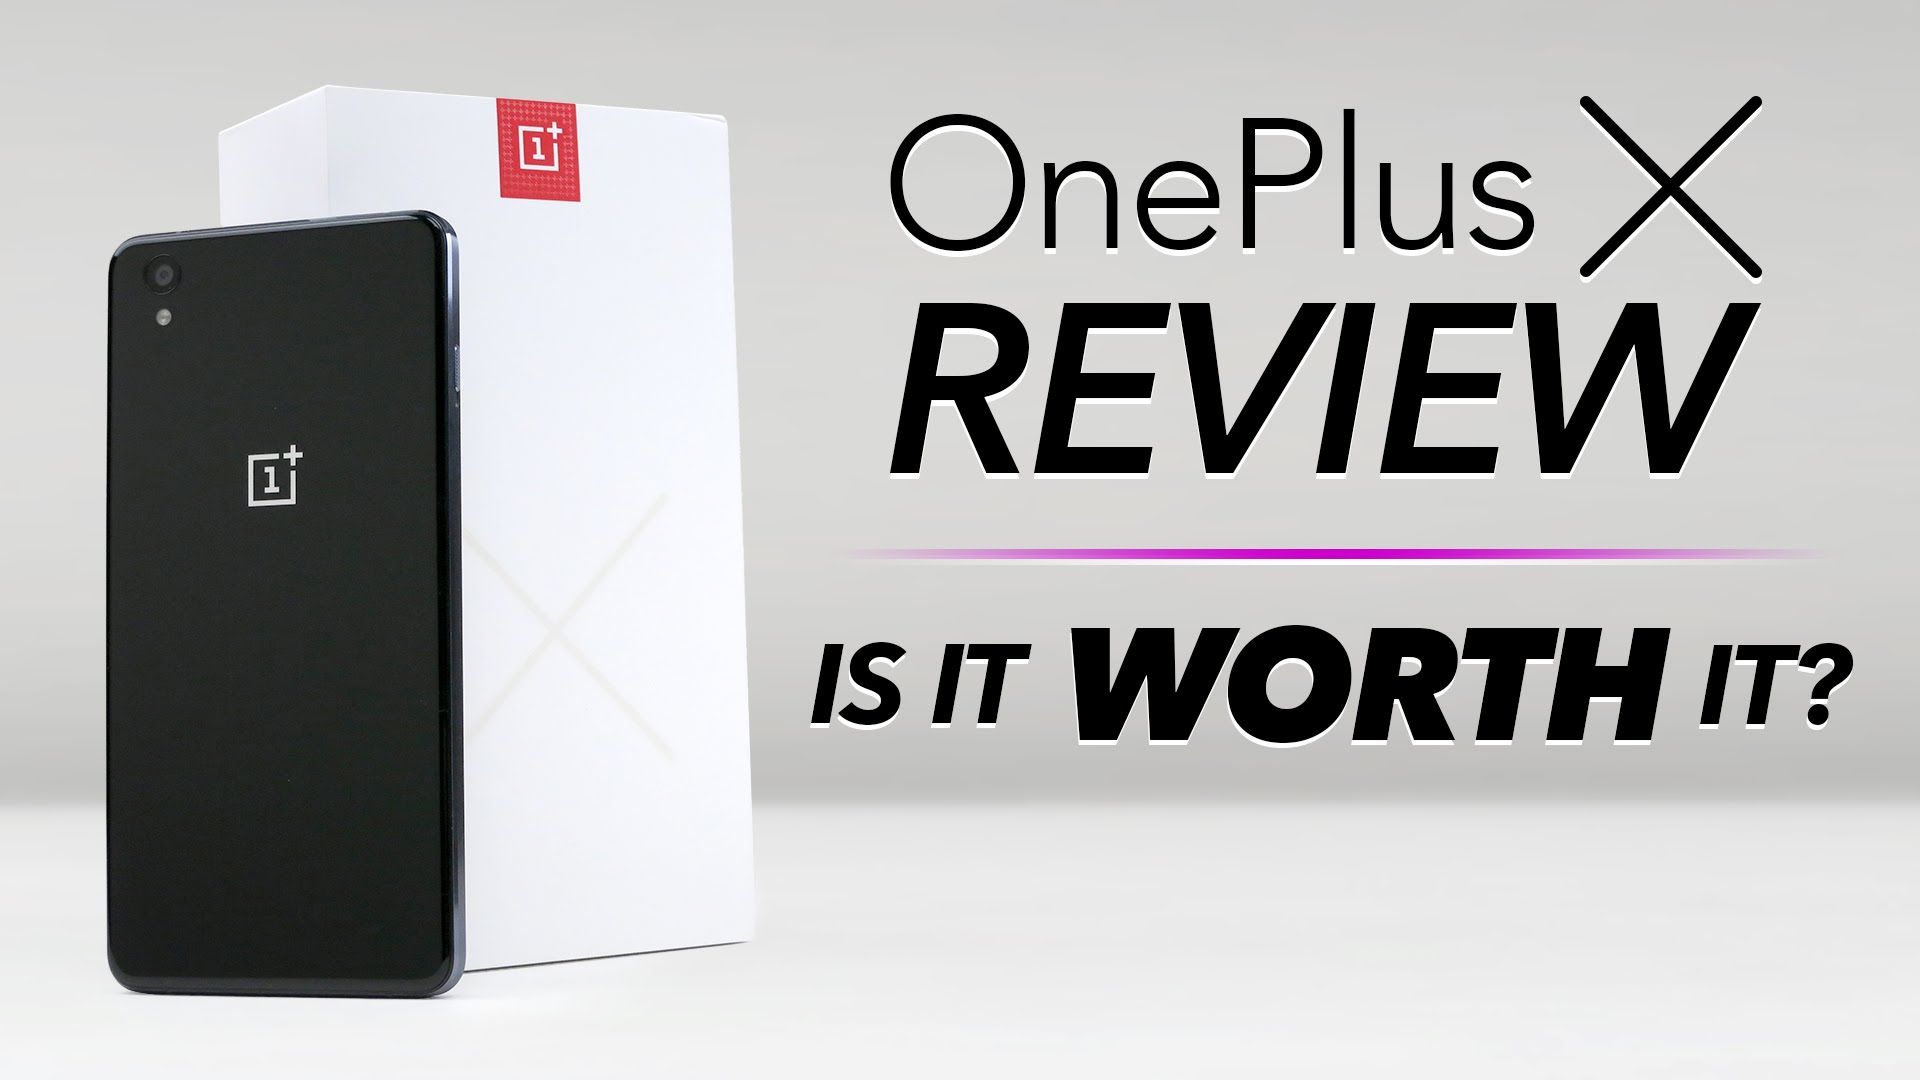 OnePlus X Review: Is It Worth It?